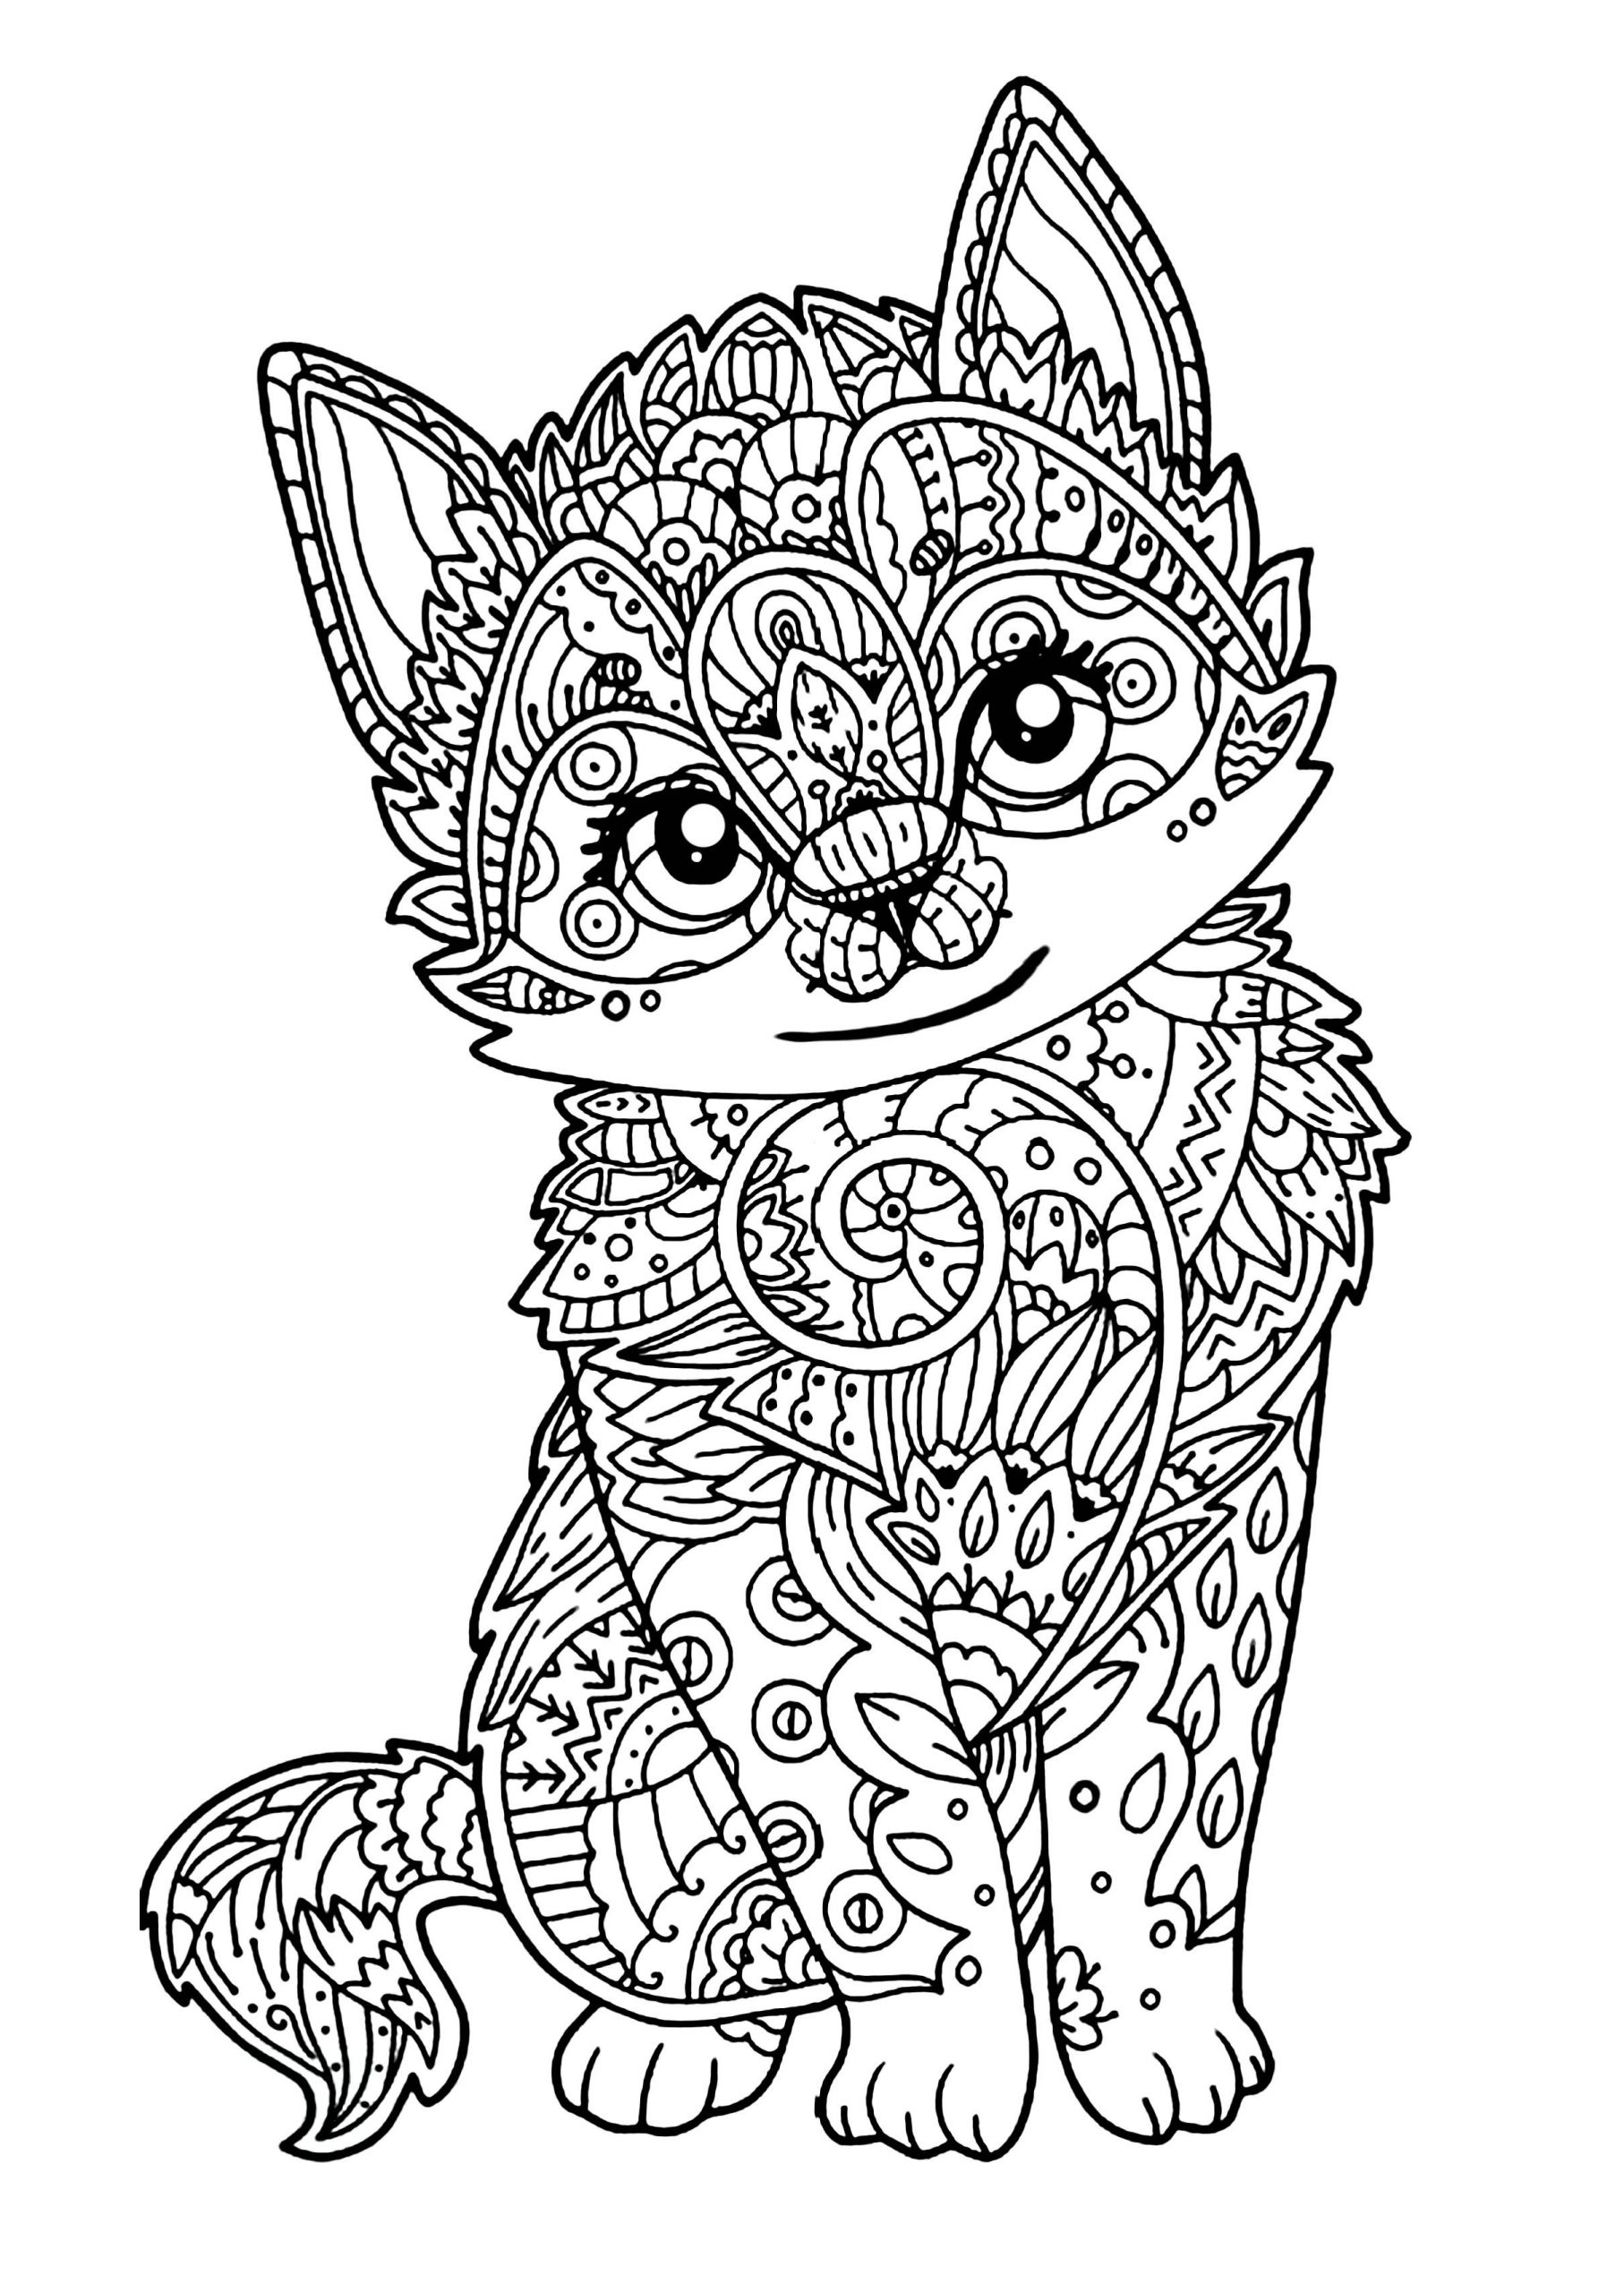 Cute Animal Coloring Pages For Adults
 Cute kitten Cats Adult Coloring Pages